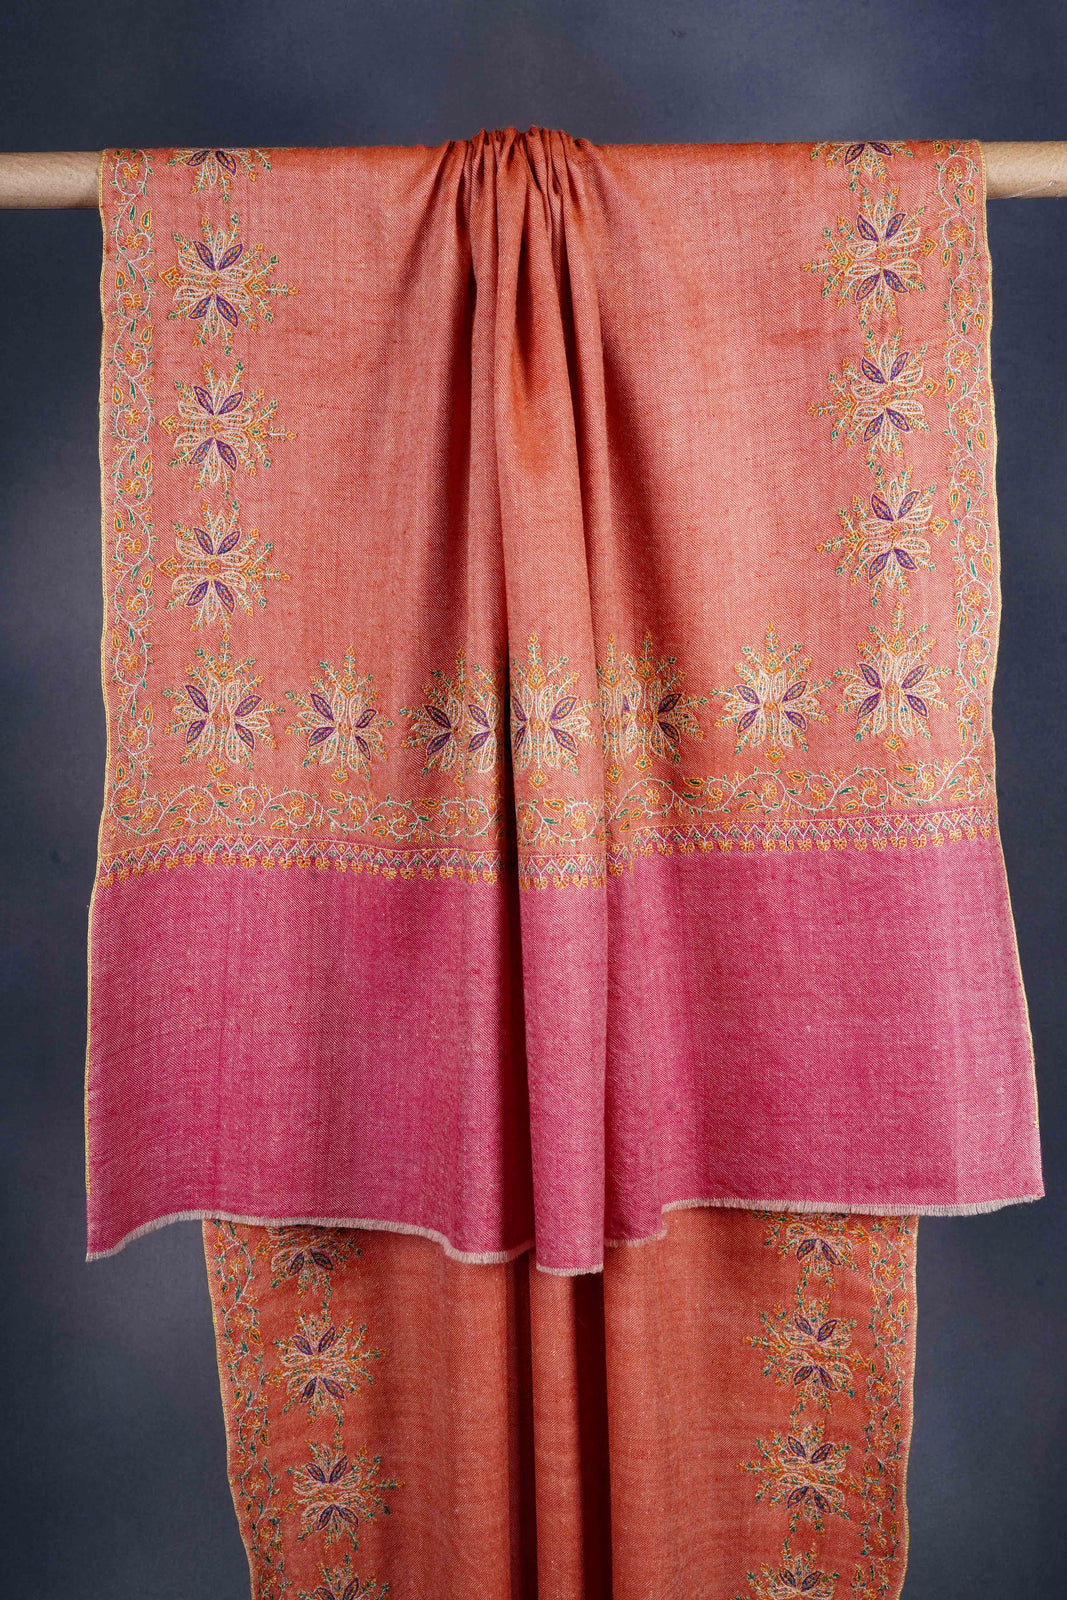 Pink and Brick Red Border Embroidery Cashmere Pashmina Shawl